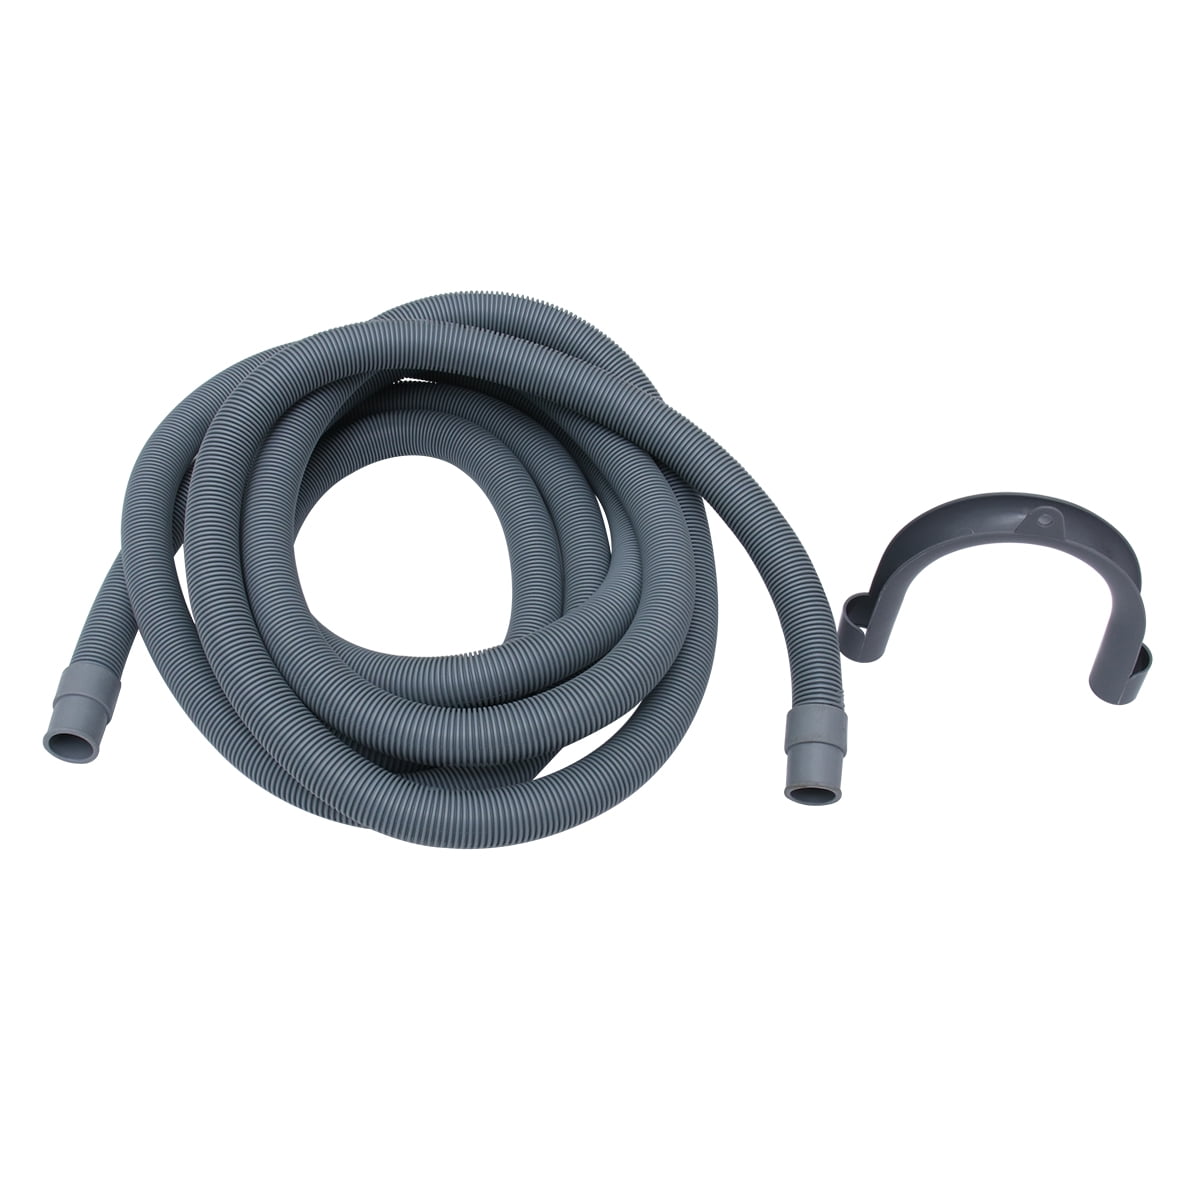 LG Washing Machine Drain Hose Washer Dryer Outlet Water Pipe 4m 19  22mm 